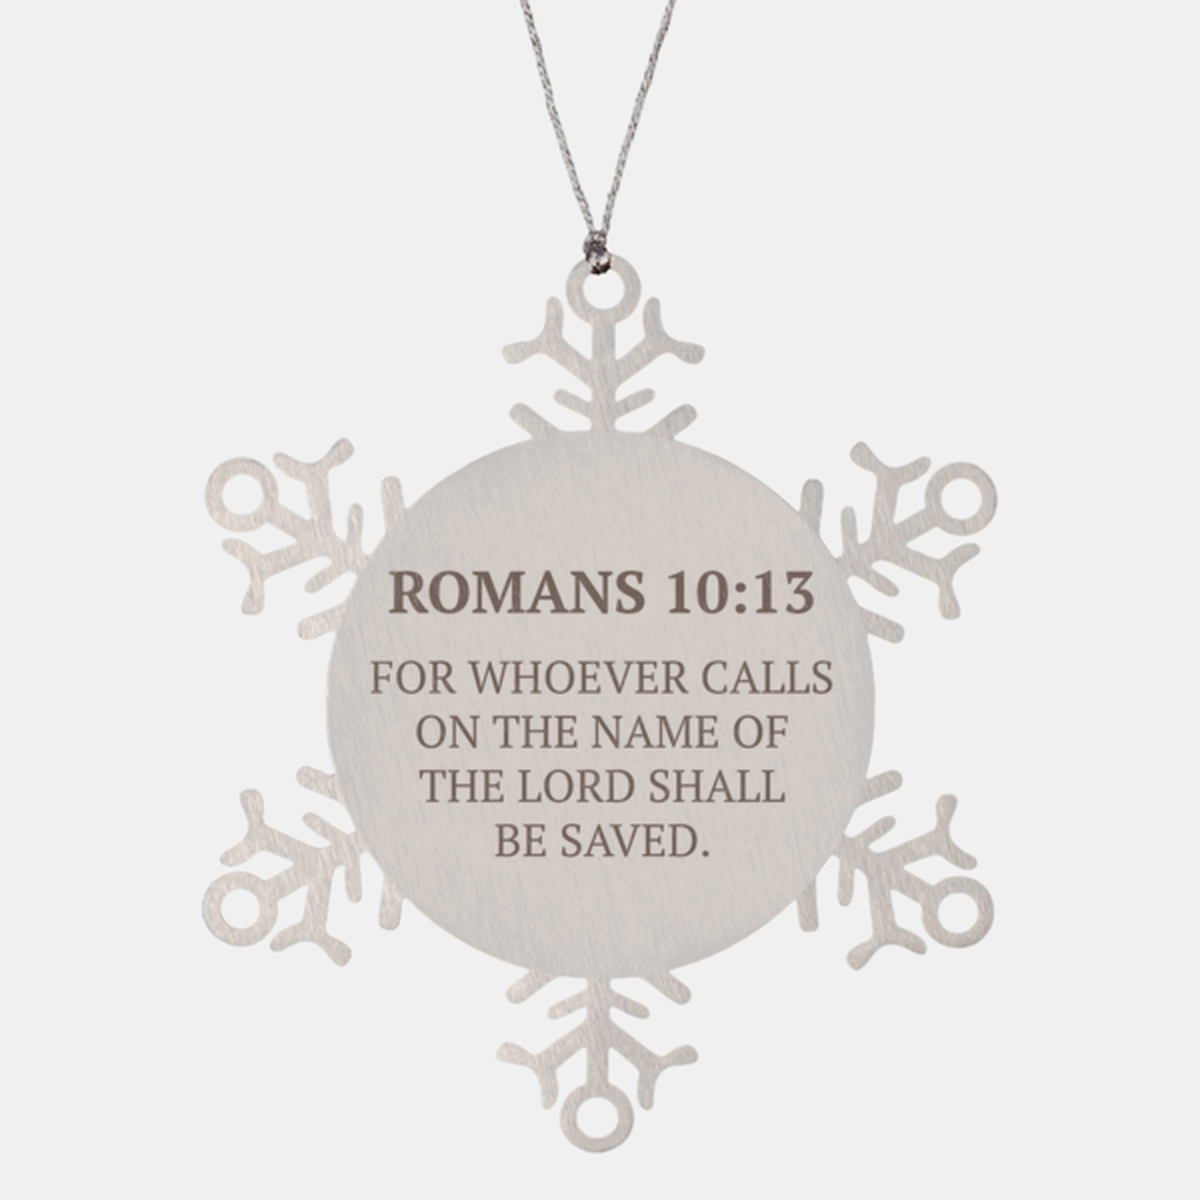 Christian Ornaments For Christmas Tree, For Whoever Calls On The Name, Religious Christmas Decorations, Scripture Ornaments Gifts, Bible Verse Ornament